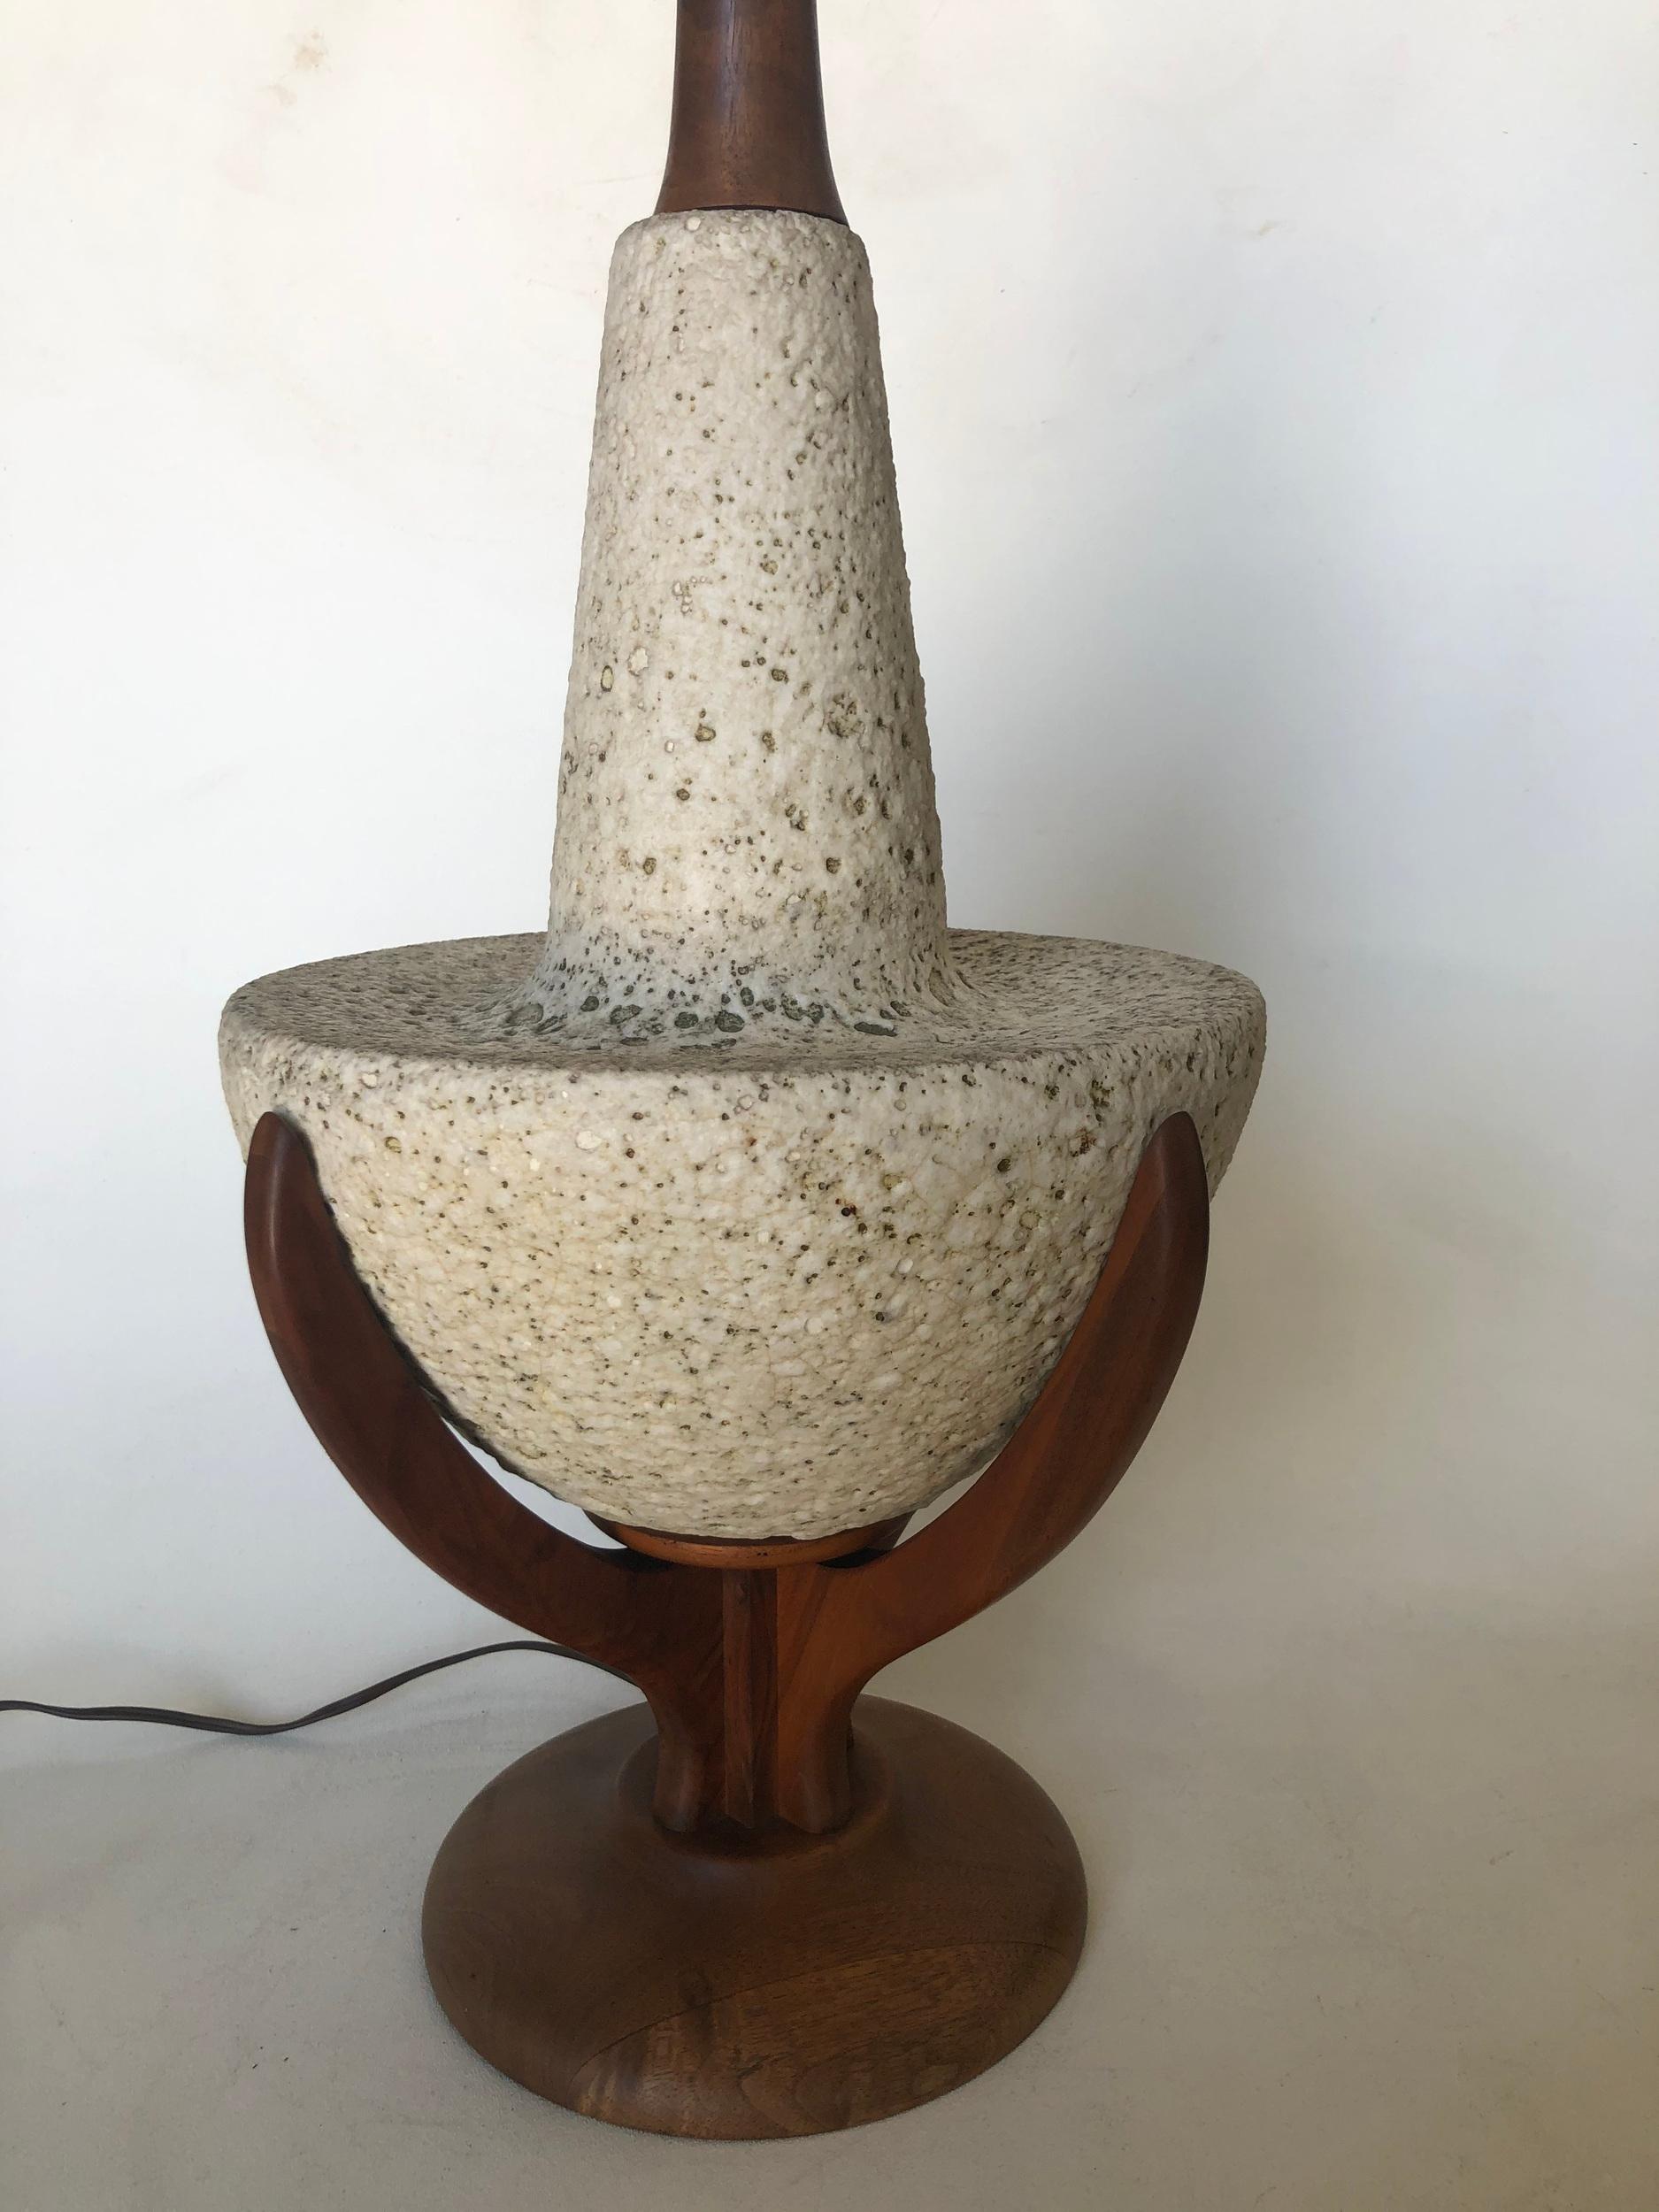 Mid-Century Modern pebble stone and teak table accent lamp.

Measures: 29